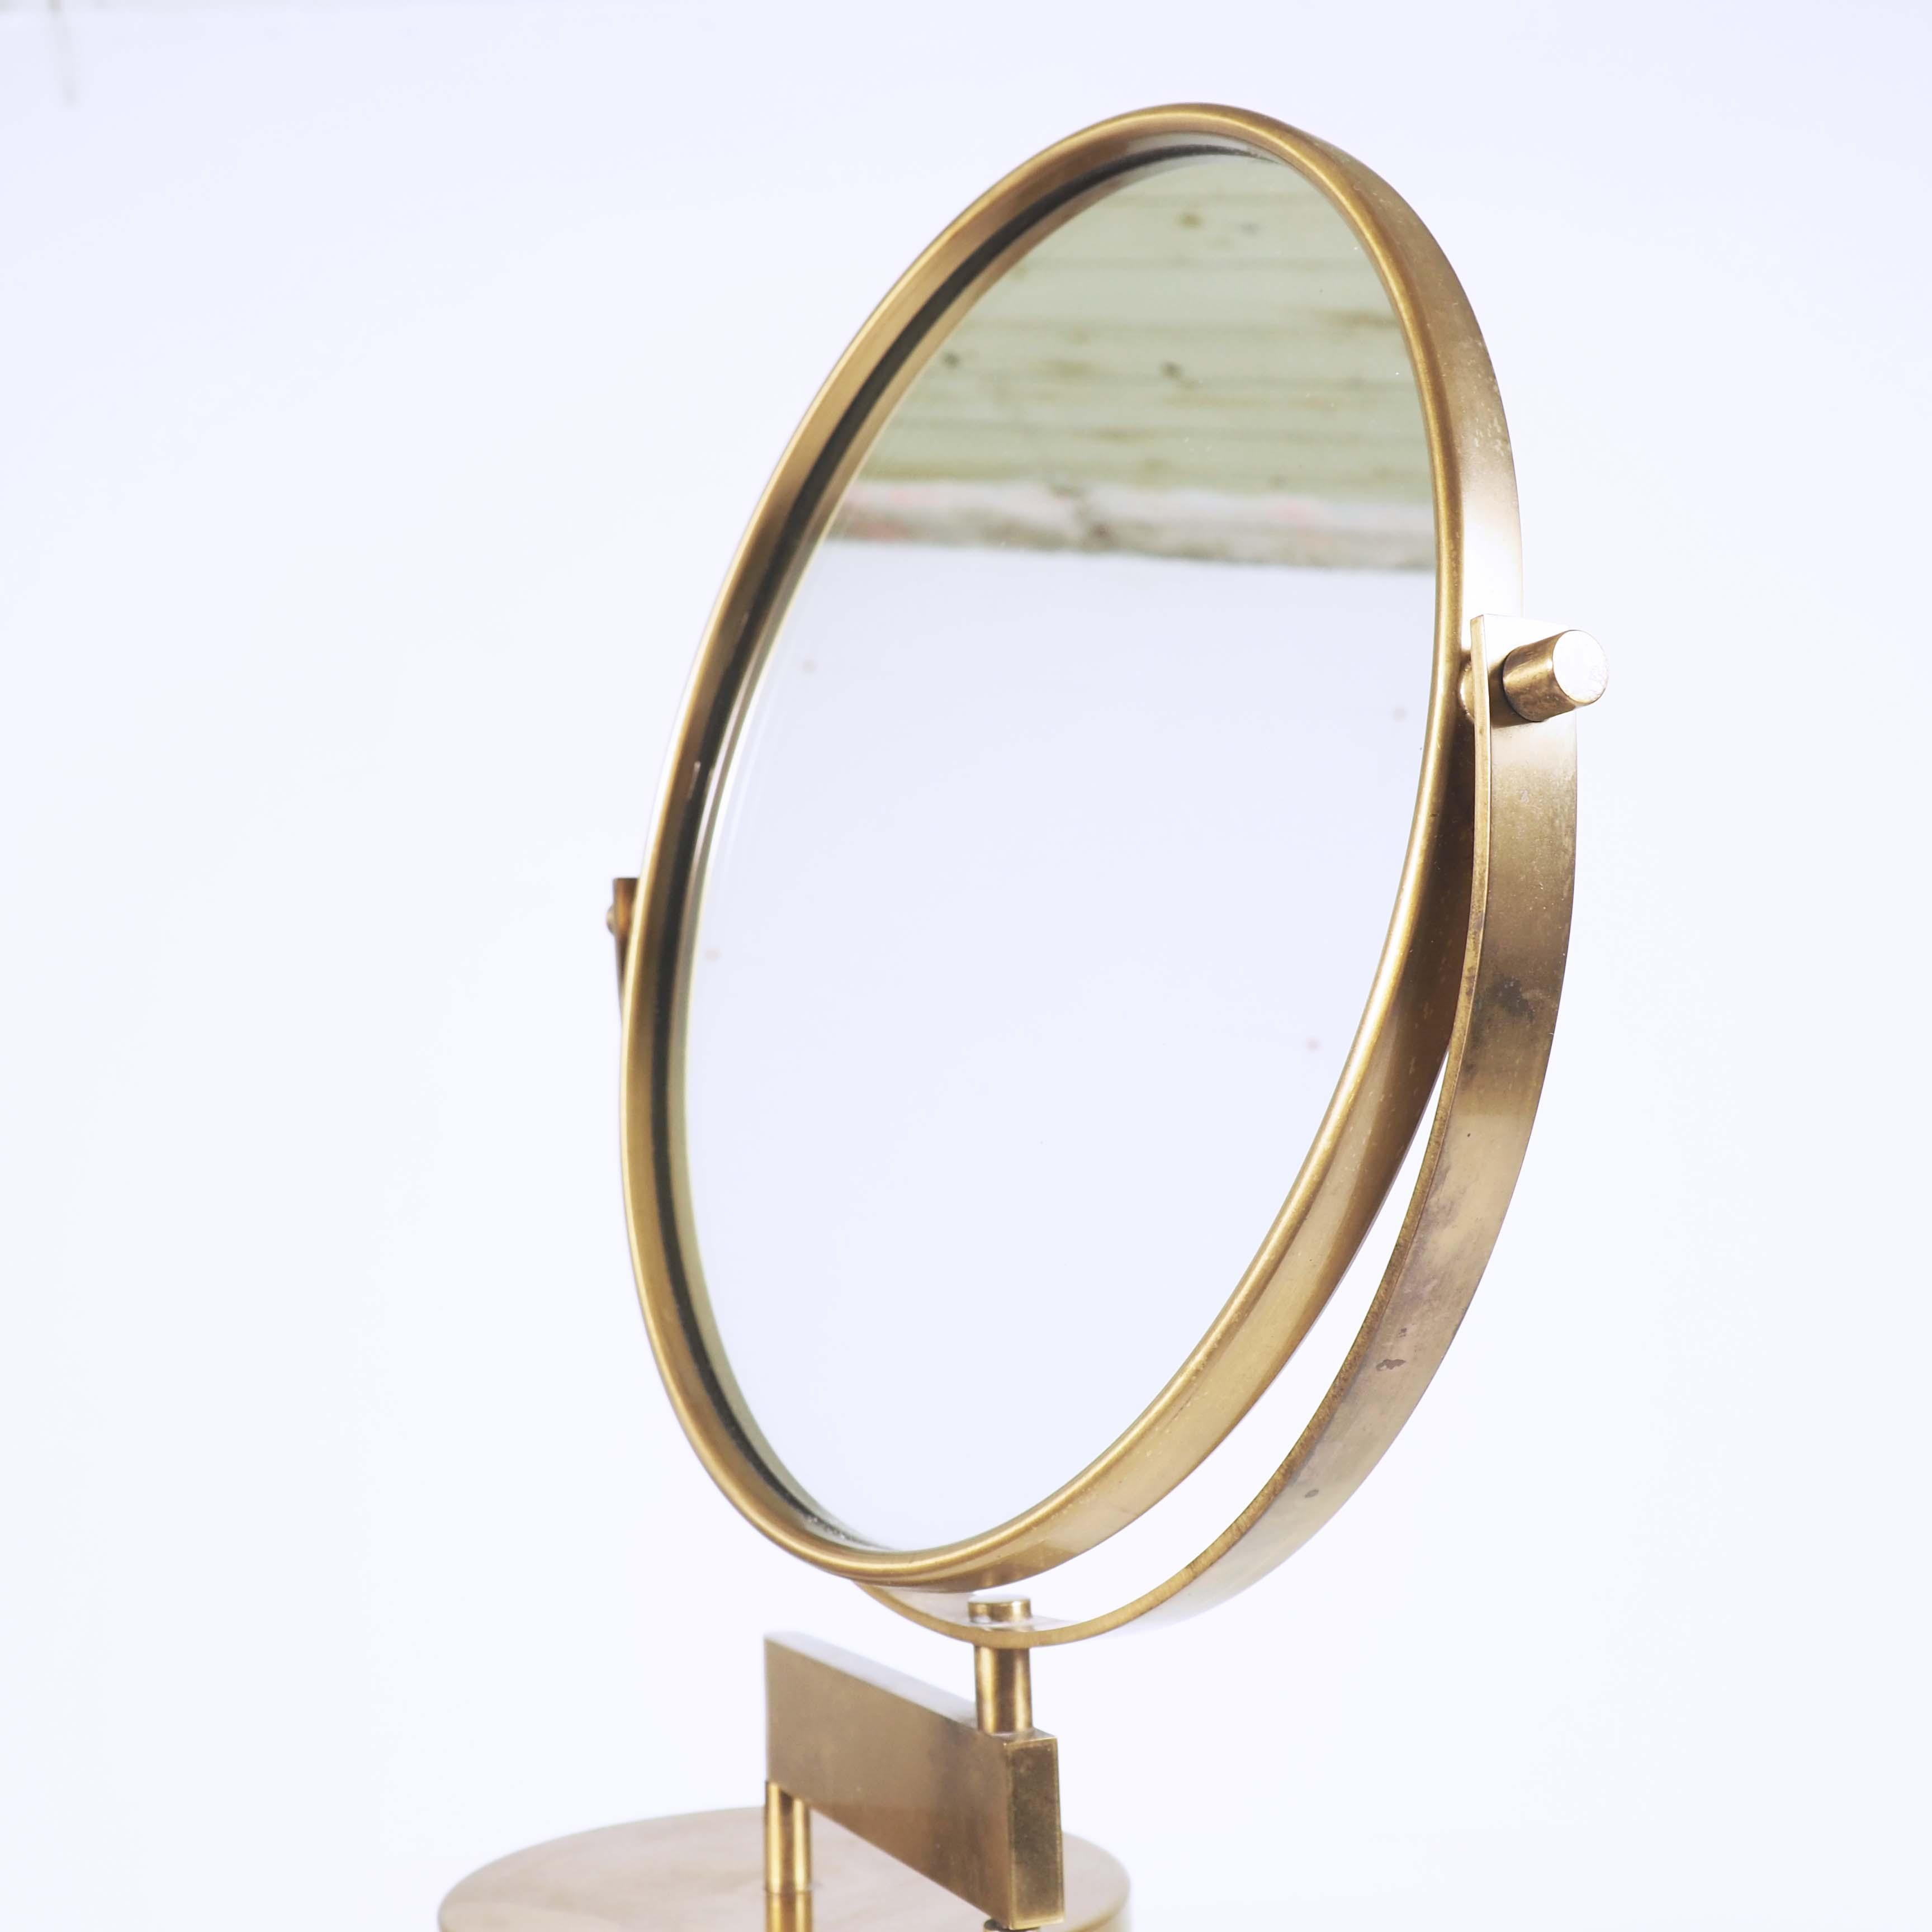 Mid-20th Century Table Mirror in Brass by Hans-Agne Jakobsson, Markaryd, Sweden